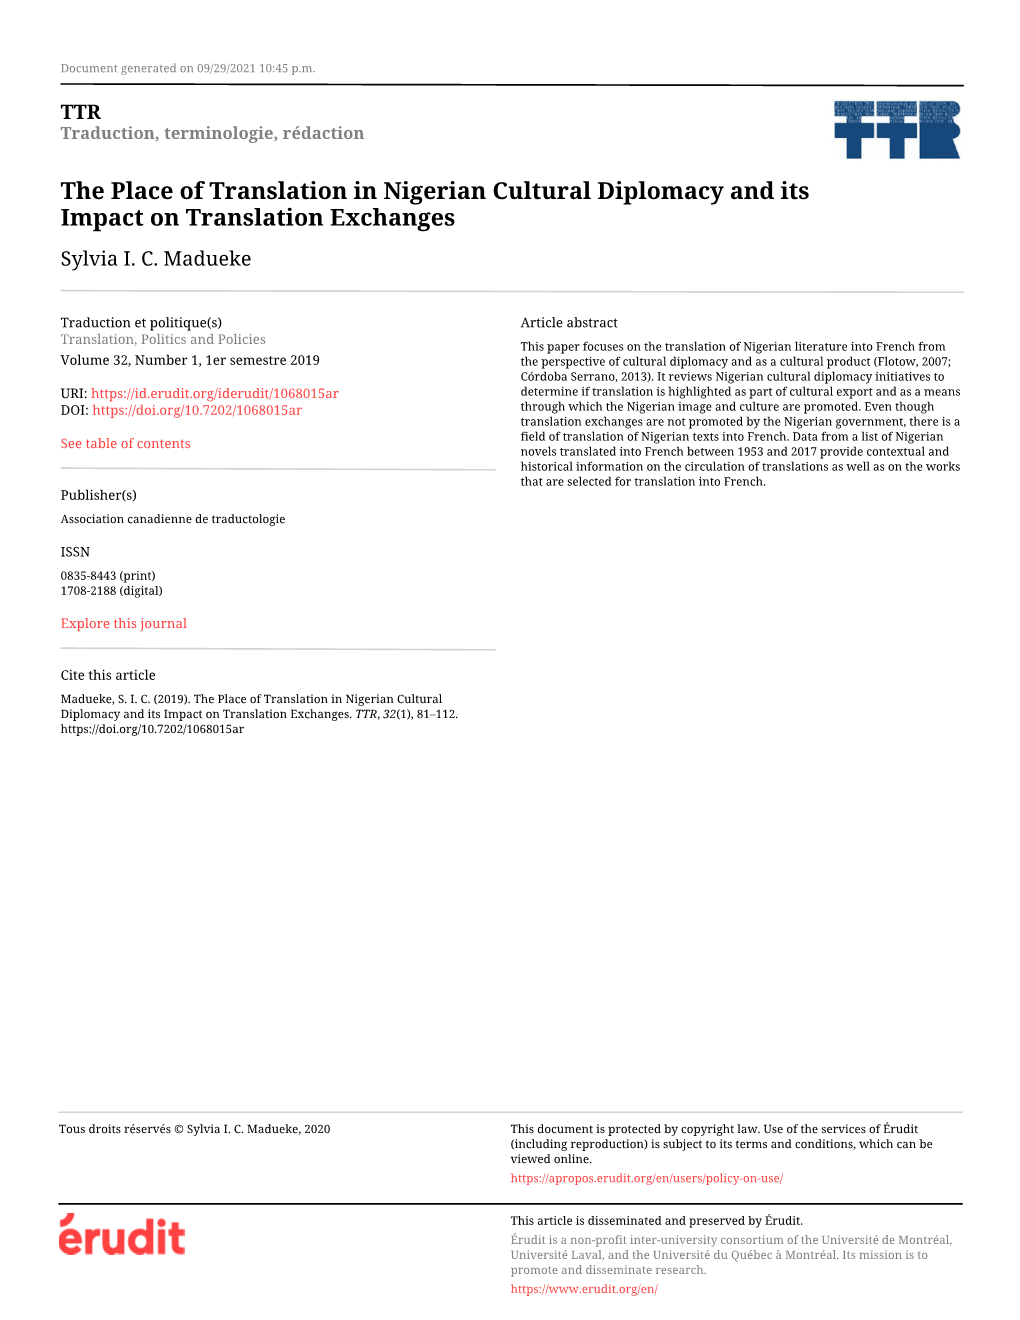 The Place of Translation in Nigerian Cultural Diplomacy and Its Impact on Translation Exchanges Sylvia I